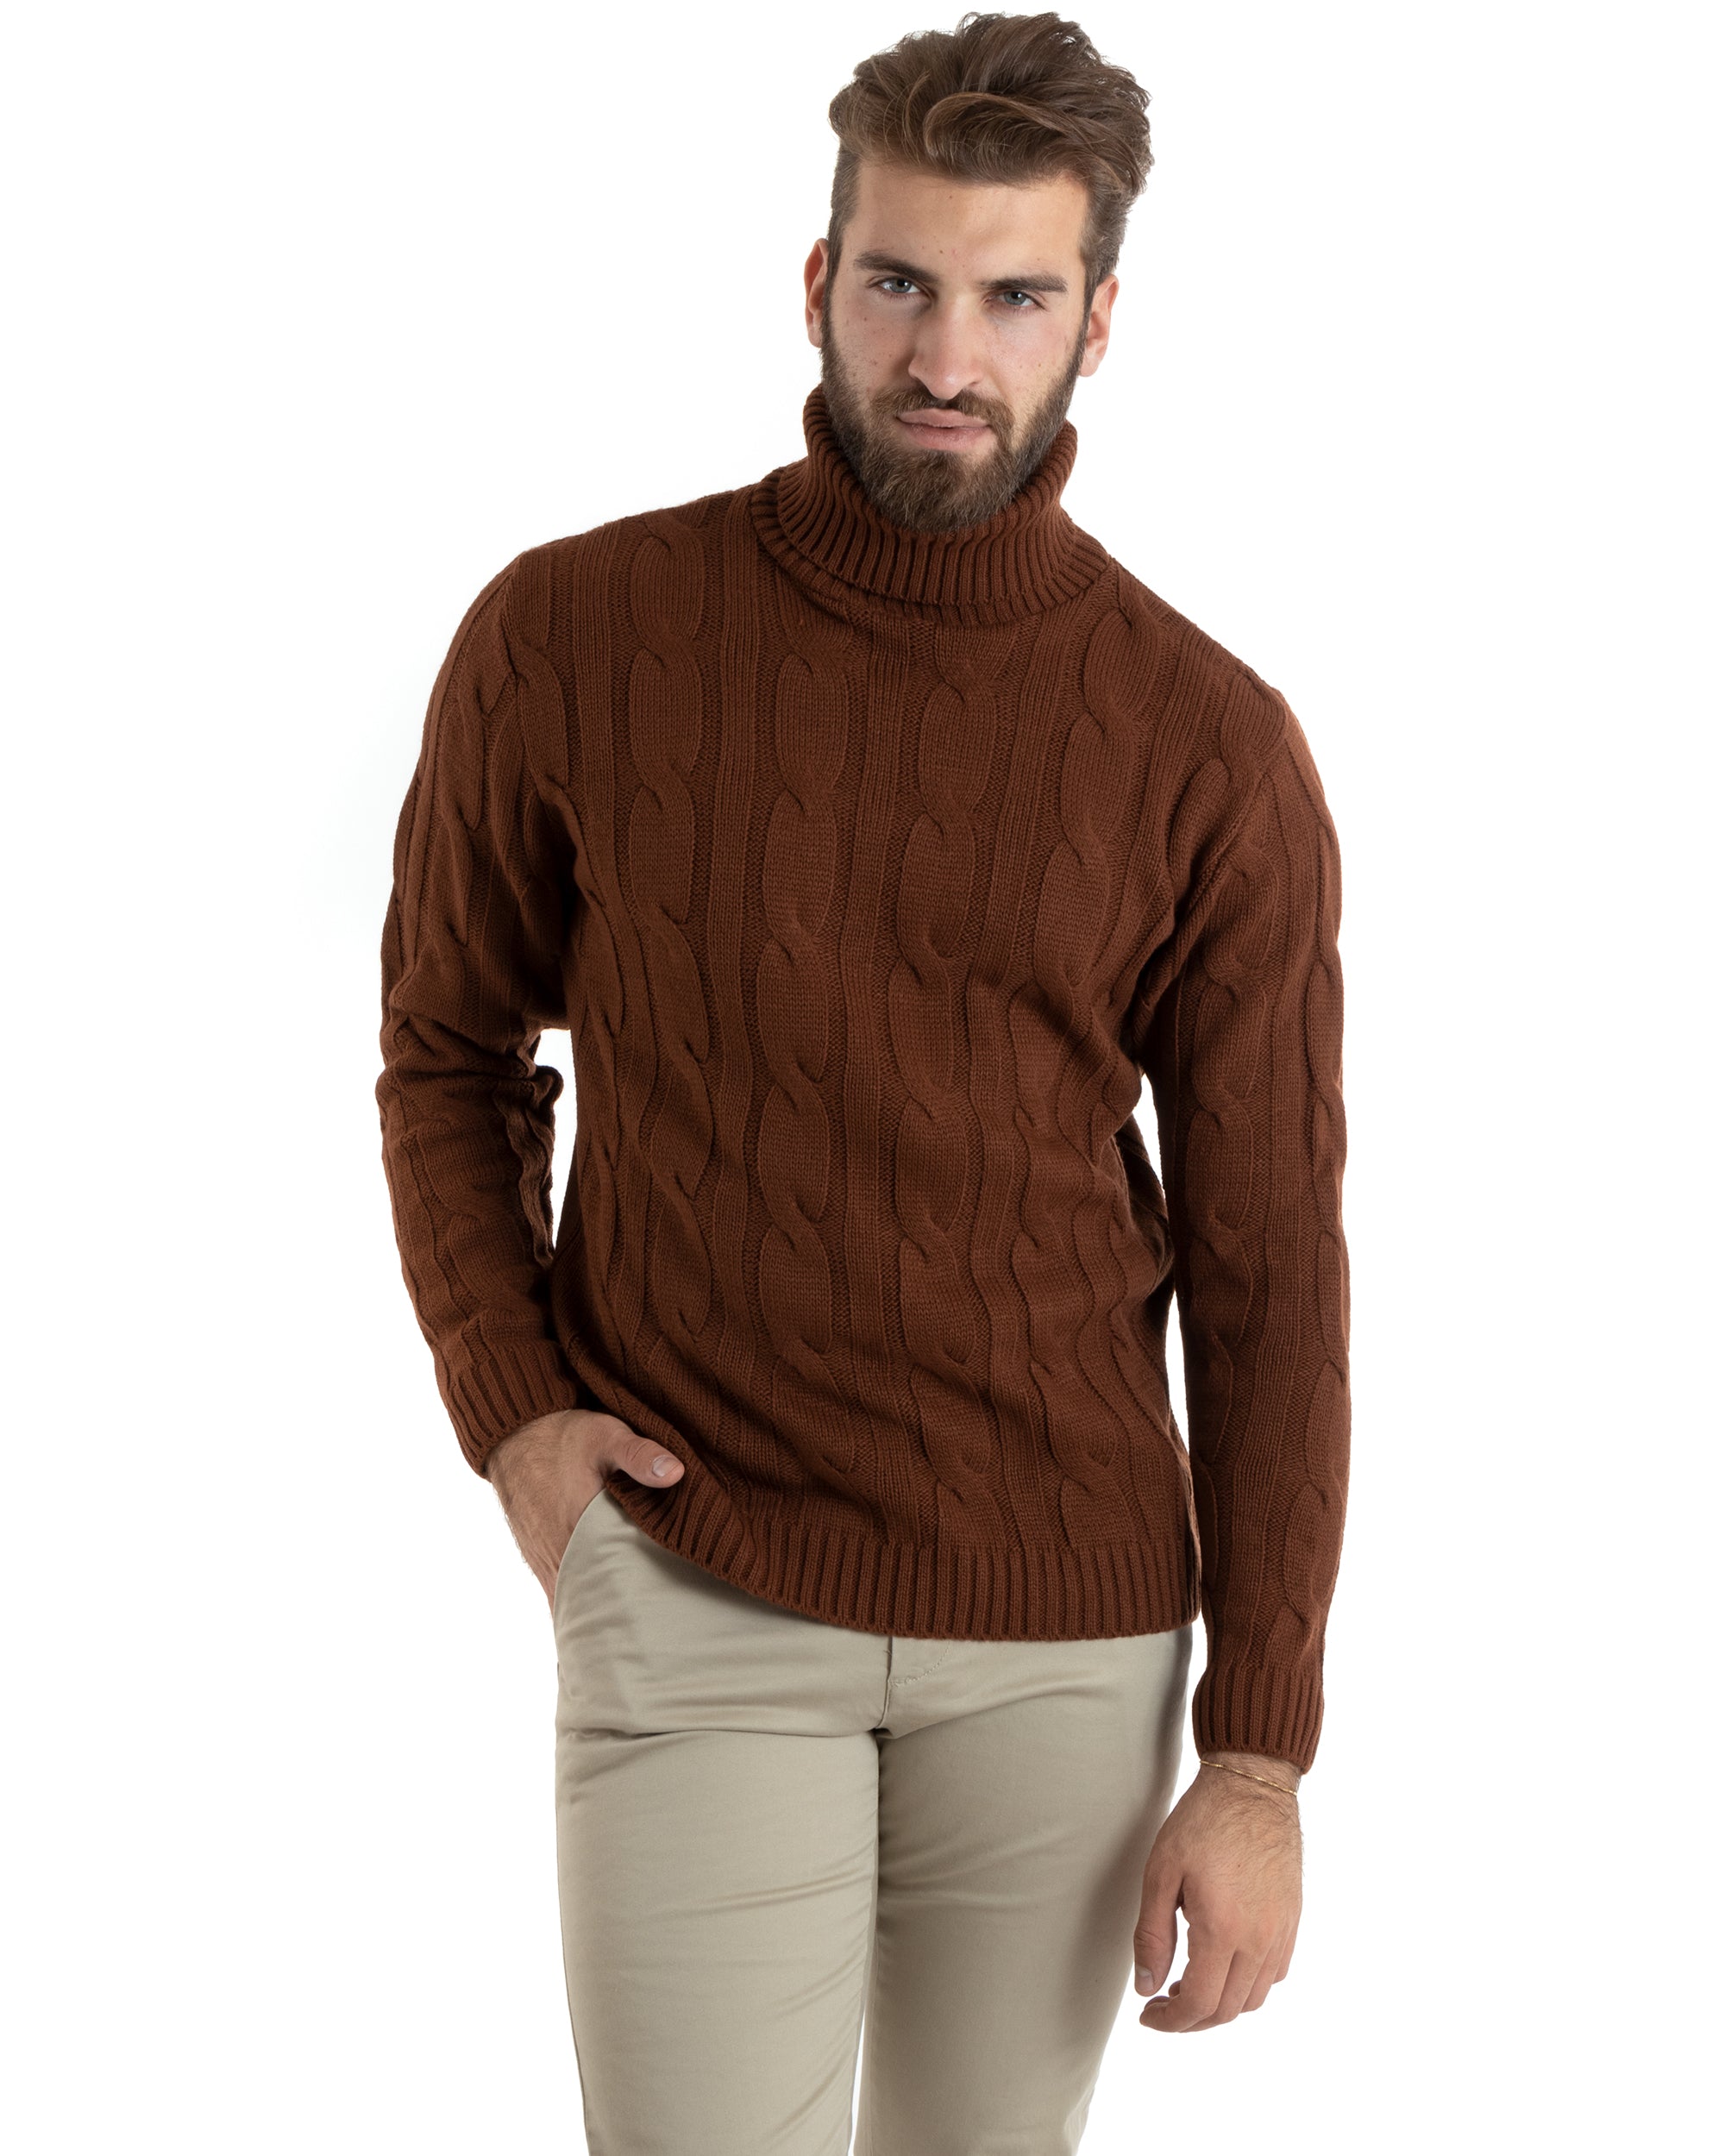 Men's Pullover Sweater Solid Color Brown Aqua Round Neck Paul Barrell GIOSAL-M2613A